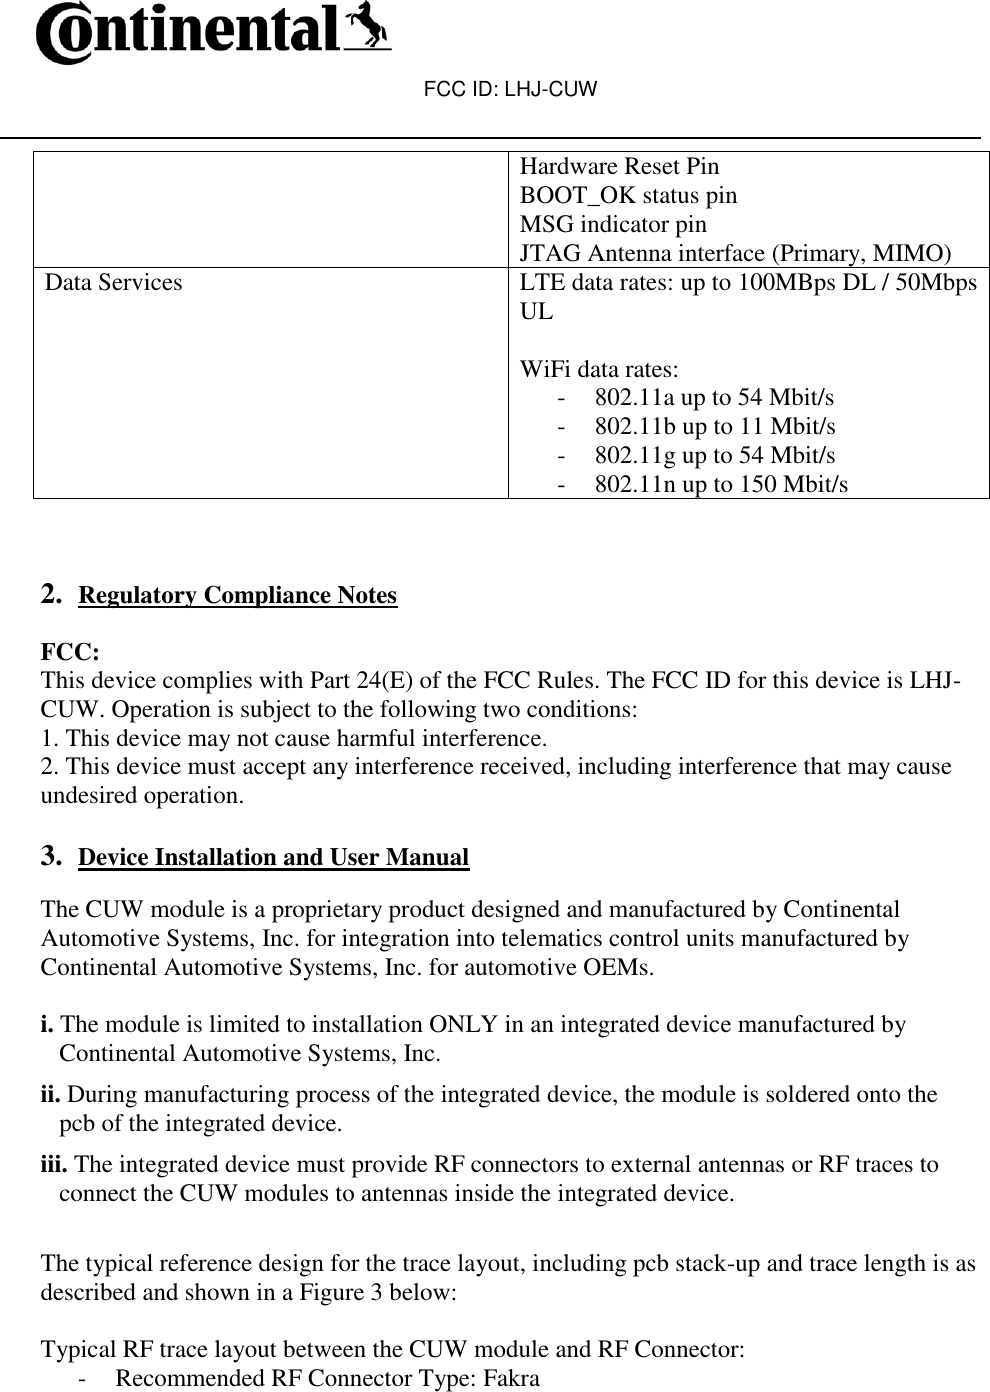 FCC ID: LHJ-CUW   Hardware Reset Pin BOOT_OK status pin MSG indicator pin JTAG Antenna interface (Primary, MIMO) Data Services LTE data rates: up to 100MBps DL / 50Mbps UL  WiFi data rates:  - 802.11a up to 54 Mbit/s - 802.11b up to 11 Mbit/s - 802.11g up to 54 Mbit/s - 802.11n up to 150 Mbit/s    2. Regulatory Compliance Notes  FCC: This device complies with Part 24(E) of the FCC Rules. The FCC ID for this device is LHJ-CUW. Operation is subject to the following two conditions: 1. This device may not cause harmful interference. 2. This device must accept any interference received, including interference that may cause undesired operation.   3. Device Installation and User Manual  The CUW module is a proprietary product designed and manufactured by Continental Automotive Systems, Inc. for integration into telematics control units manufactured by Continental Automotive Systems, Inc. for automotive OEMs.  i. The module is limited to installation ONLY in an integrated device manufactured by Continental Automotive Systems, Inc. ii. During manufacturing process of the integrated device, the module is soldered onto the pcb of the integrated device. iii. The integrated device must provide RF connectors to external antennas or RF traces to connect the CUW modules to antennas inside the integrated device.   The typical reference design for the trace layout, including pcb stack-up and trace length is as described and shown in a Figure 3 below:  Typical RF trace layout between the CUW module and RF Connector: - Recommended RF Connector Type: Fakra 